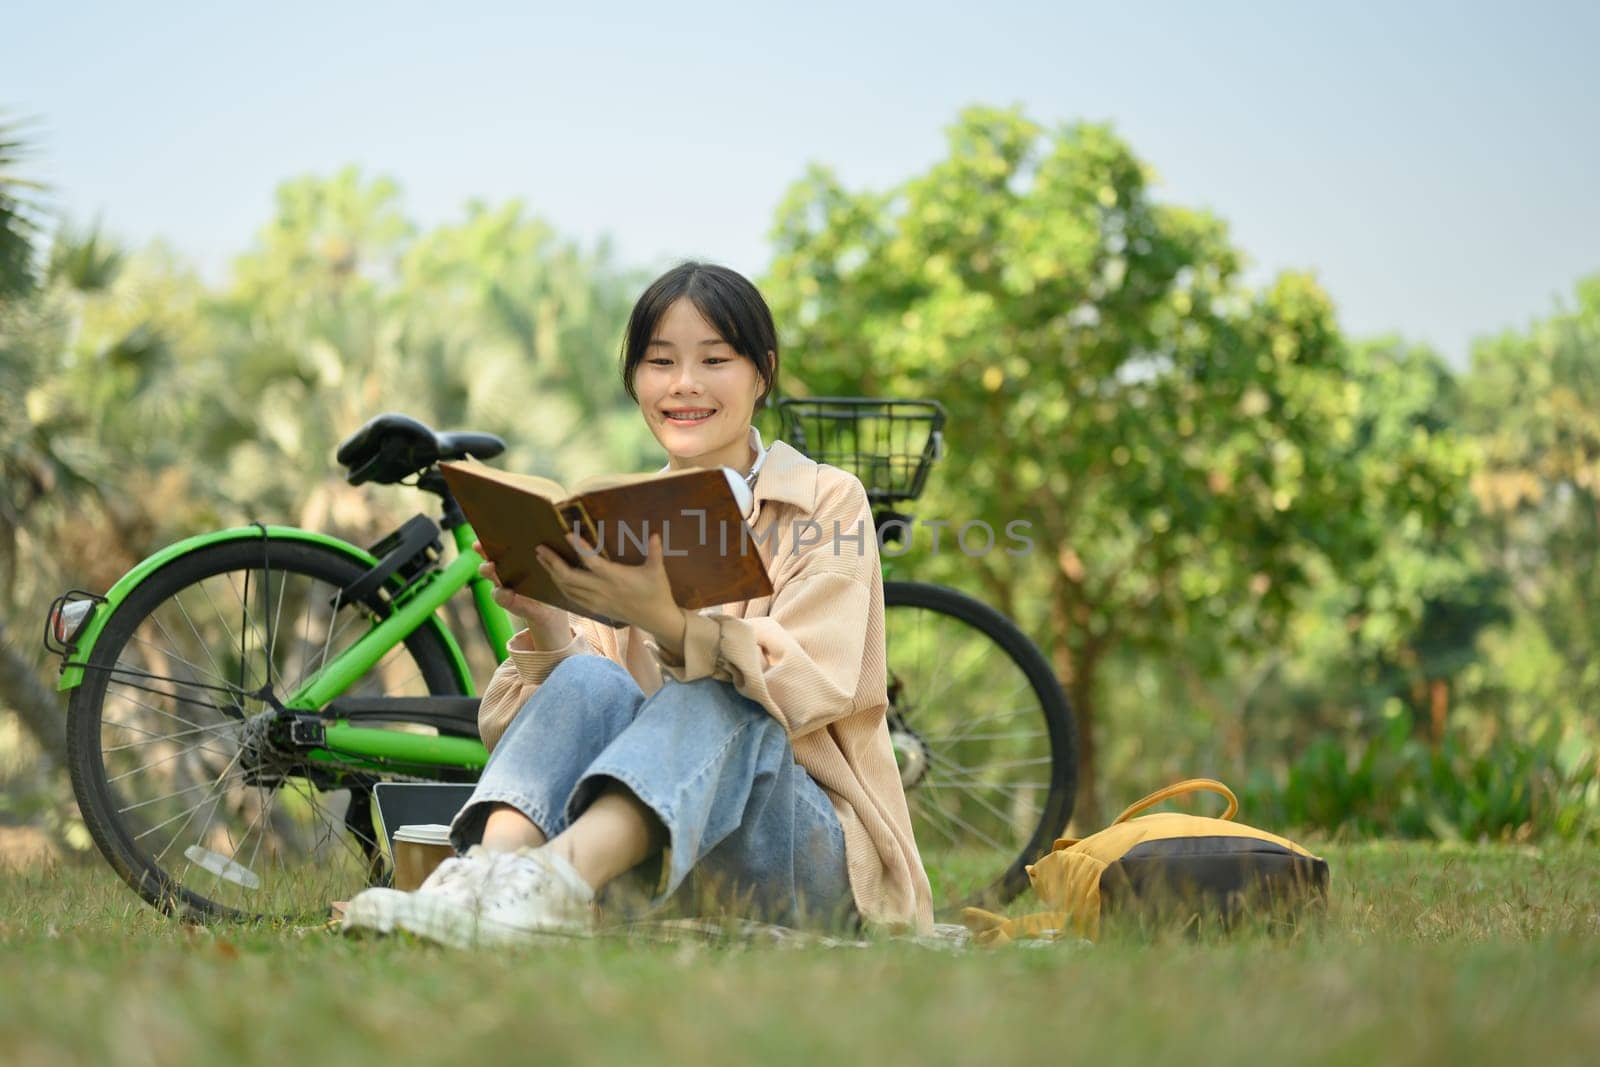 Carefree young woman reading book on green grass at the park with a bicycle.